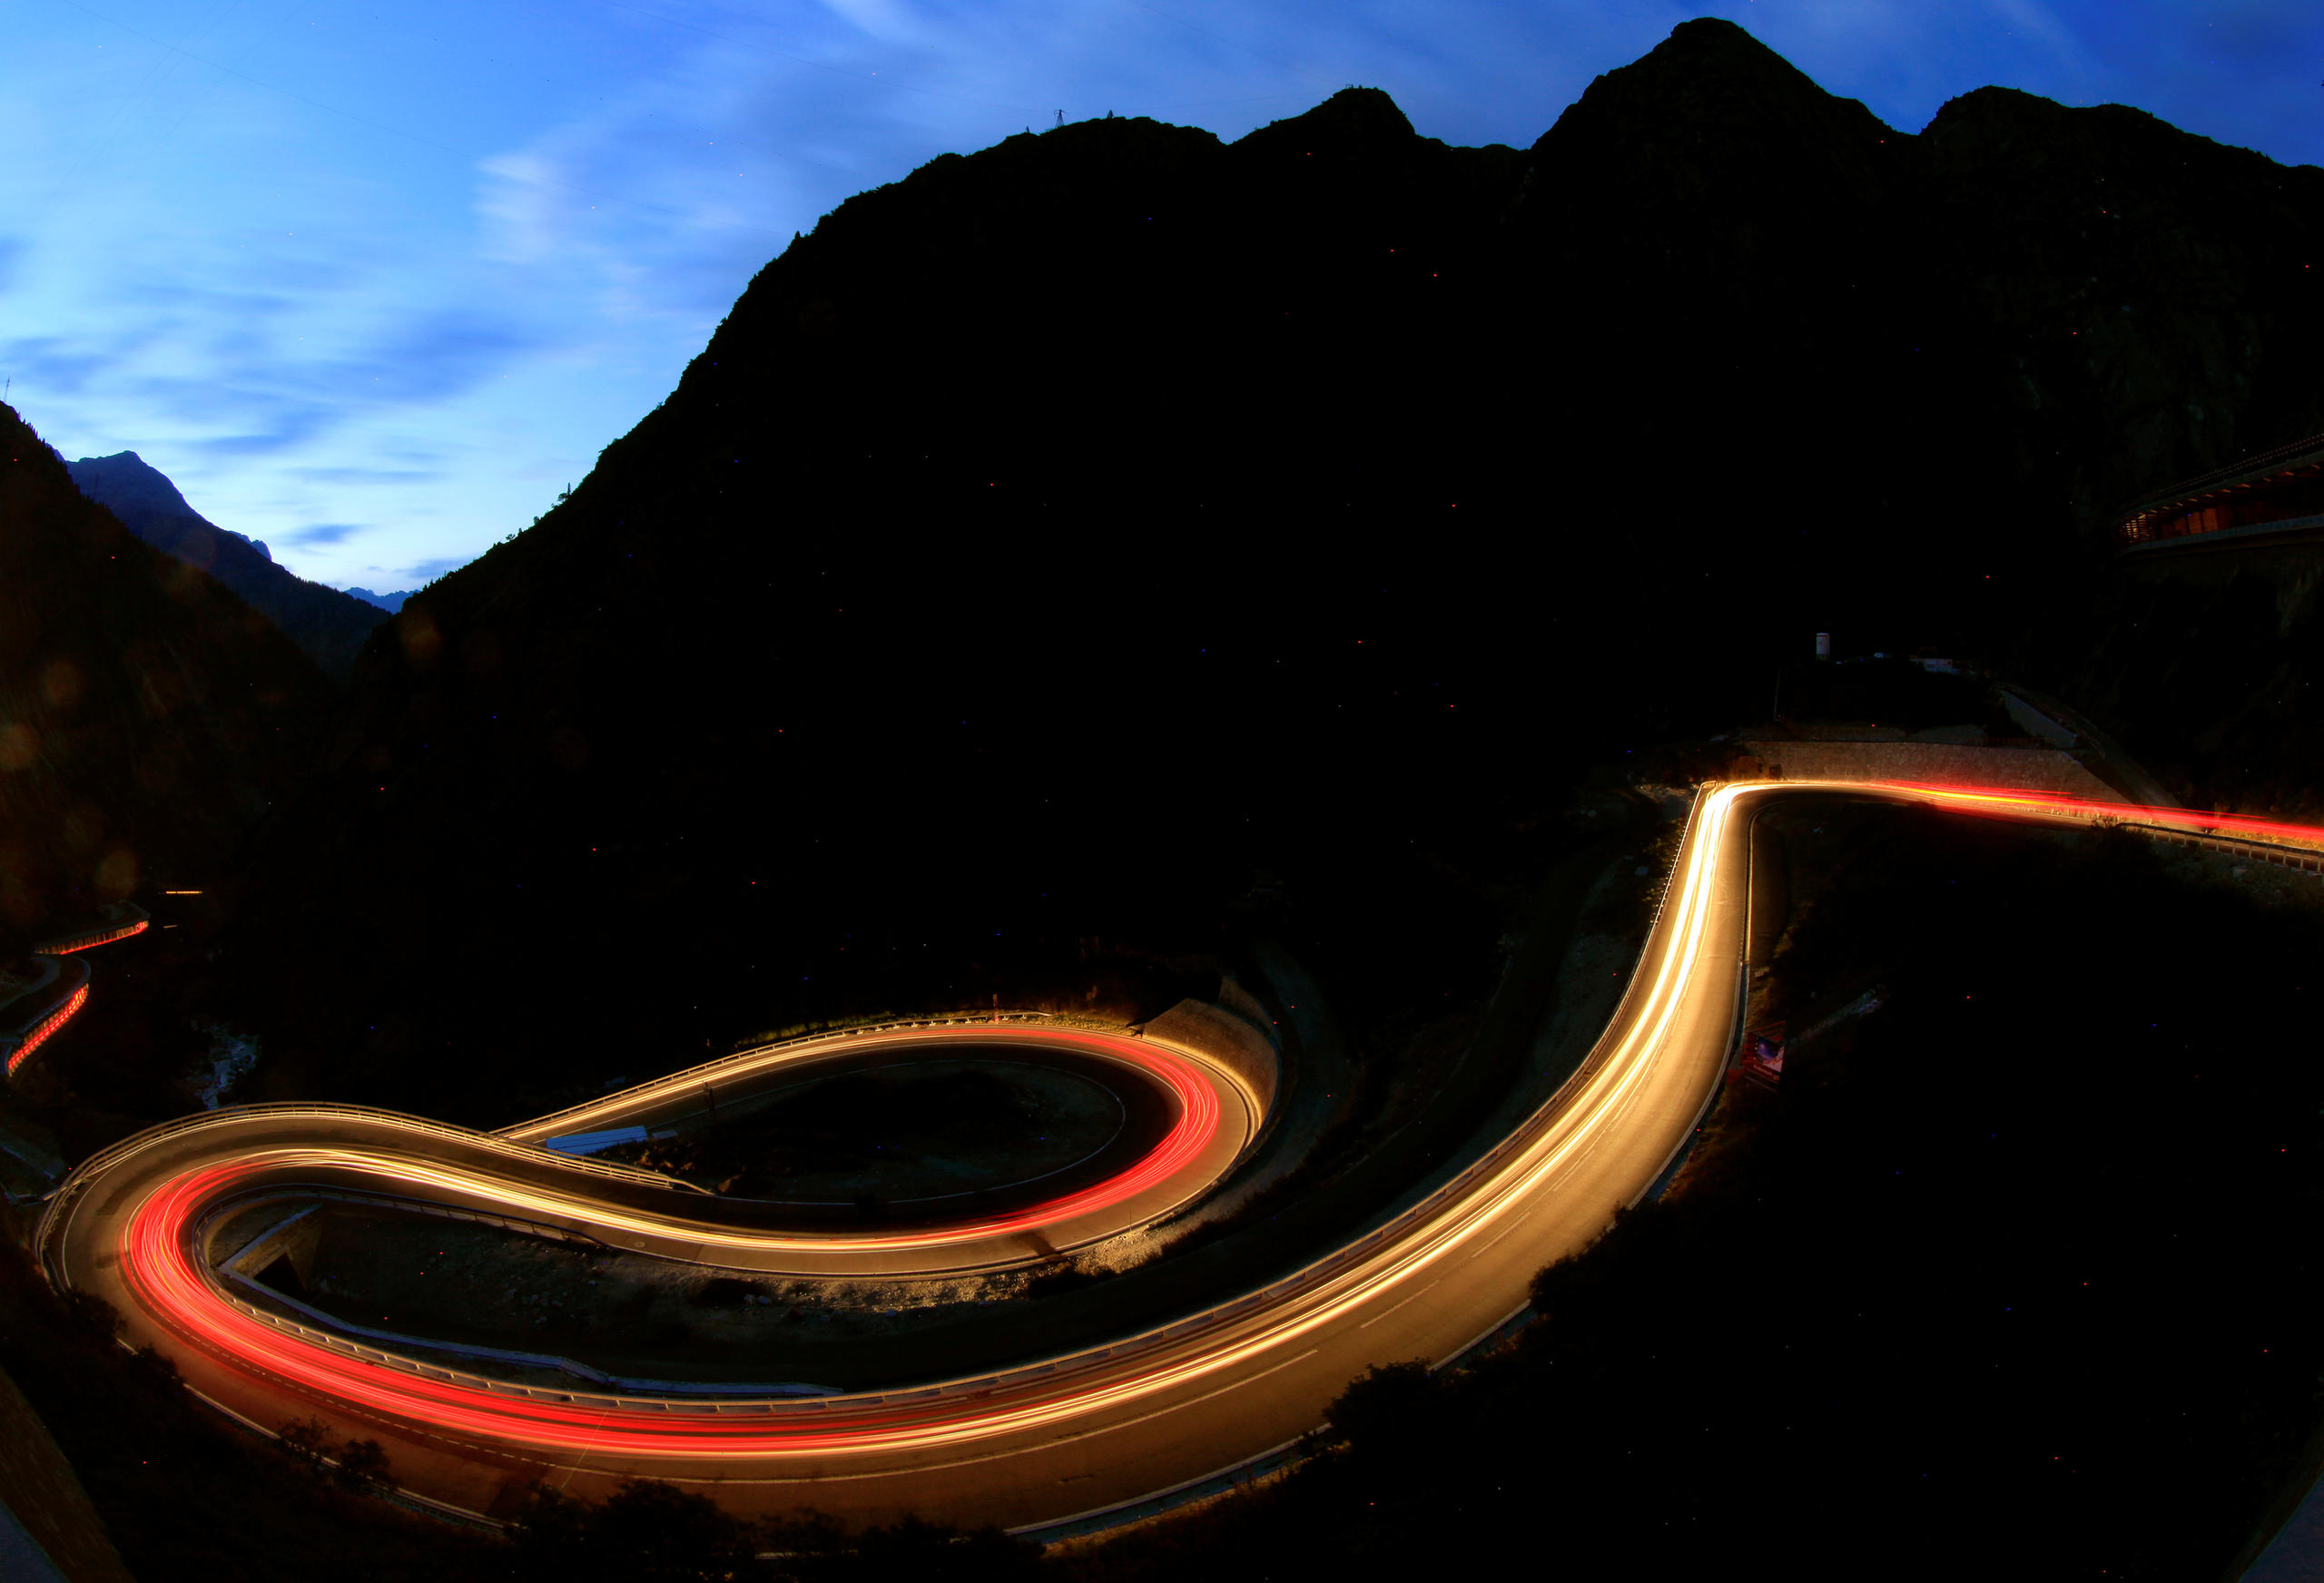 A long exposure shows traffic flowing on the Gotthardstrasse mountain pass